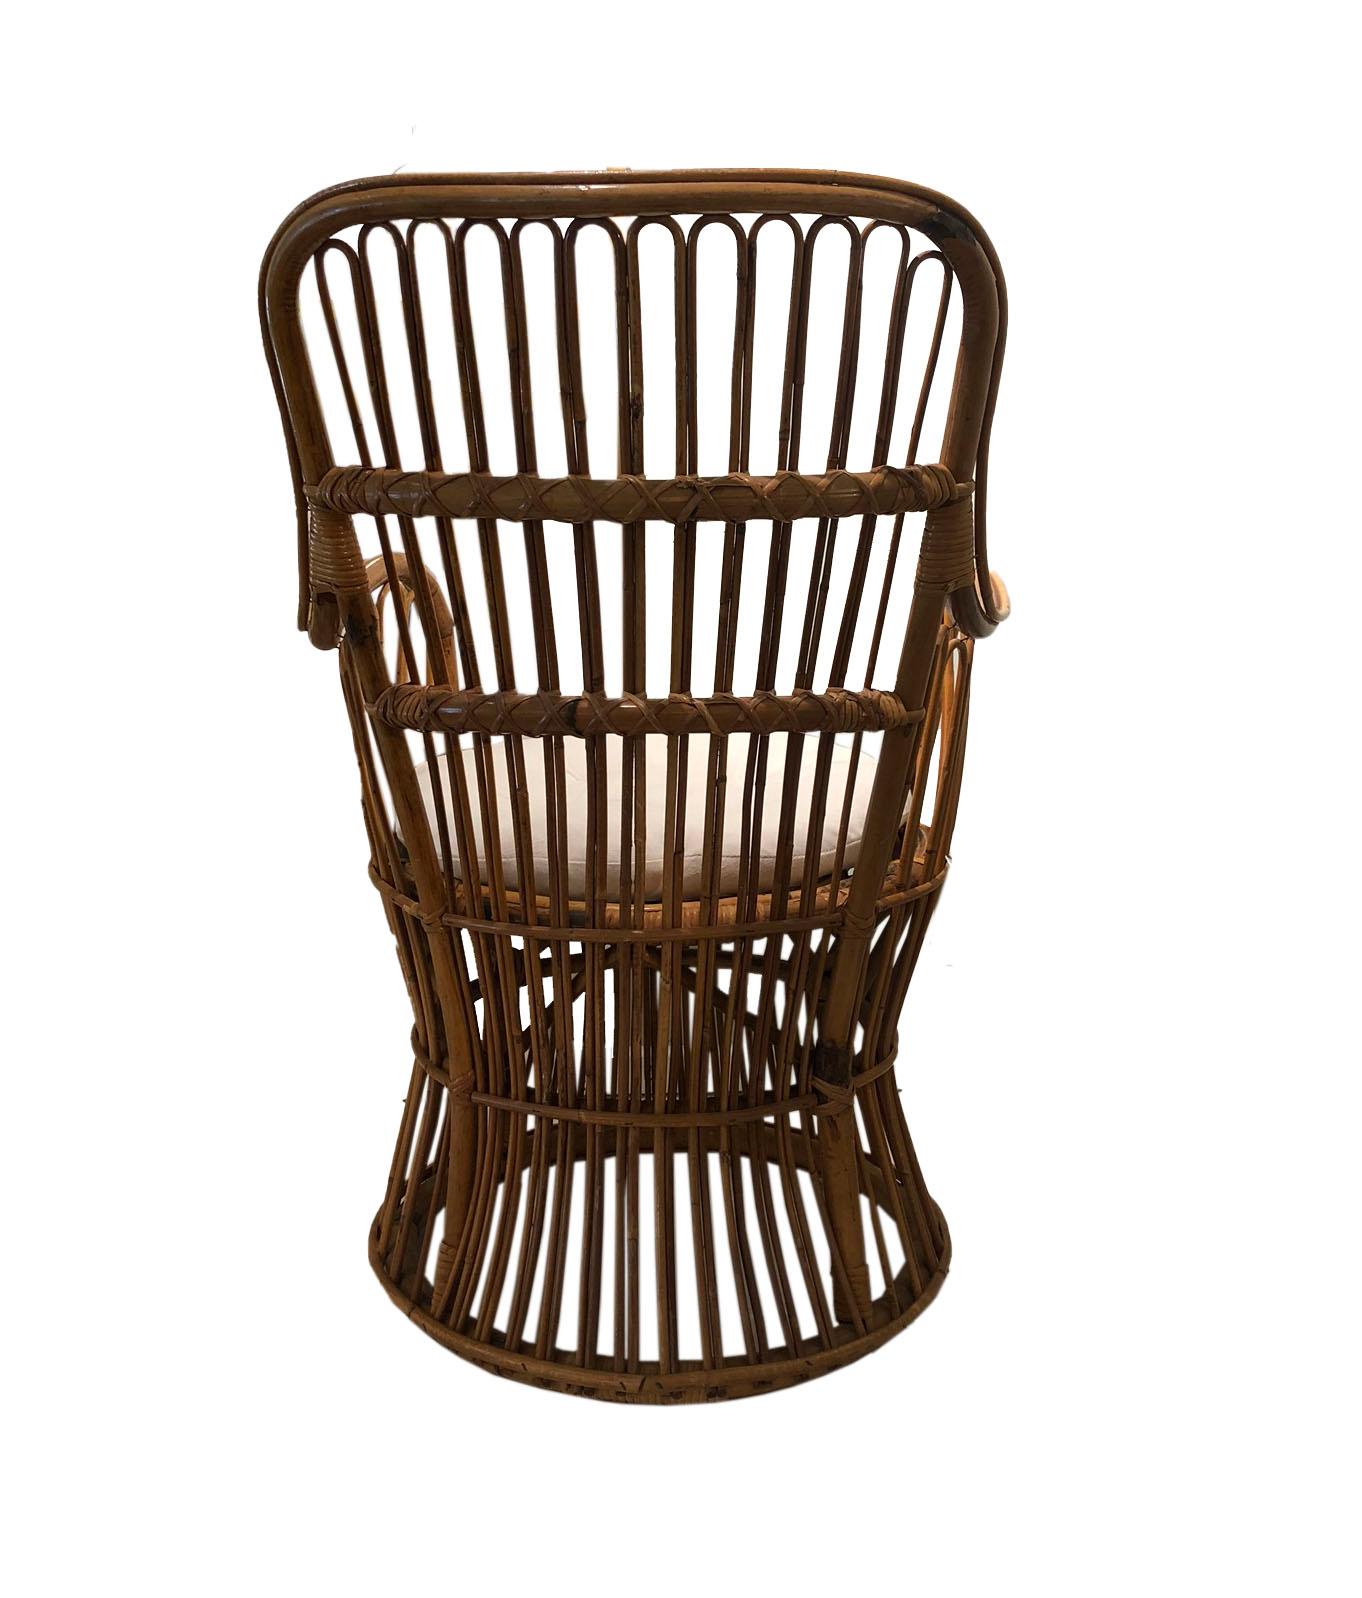 American Vintage Coastal Rattan Chair with New Upholstered Cushion